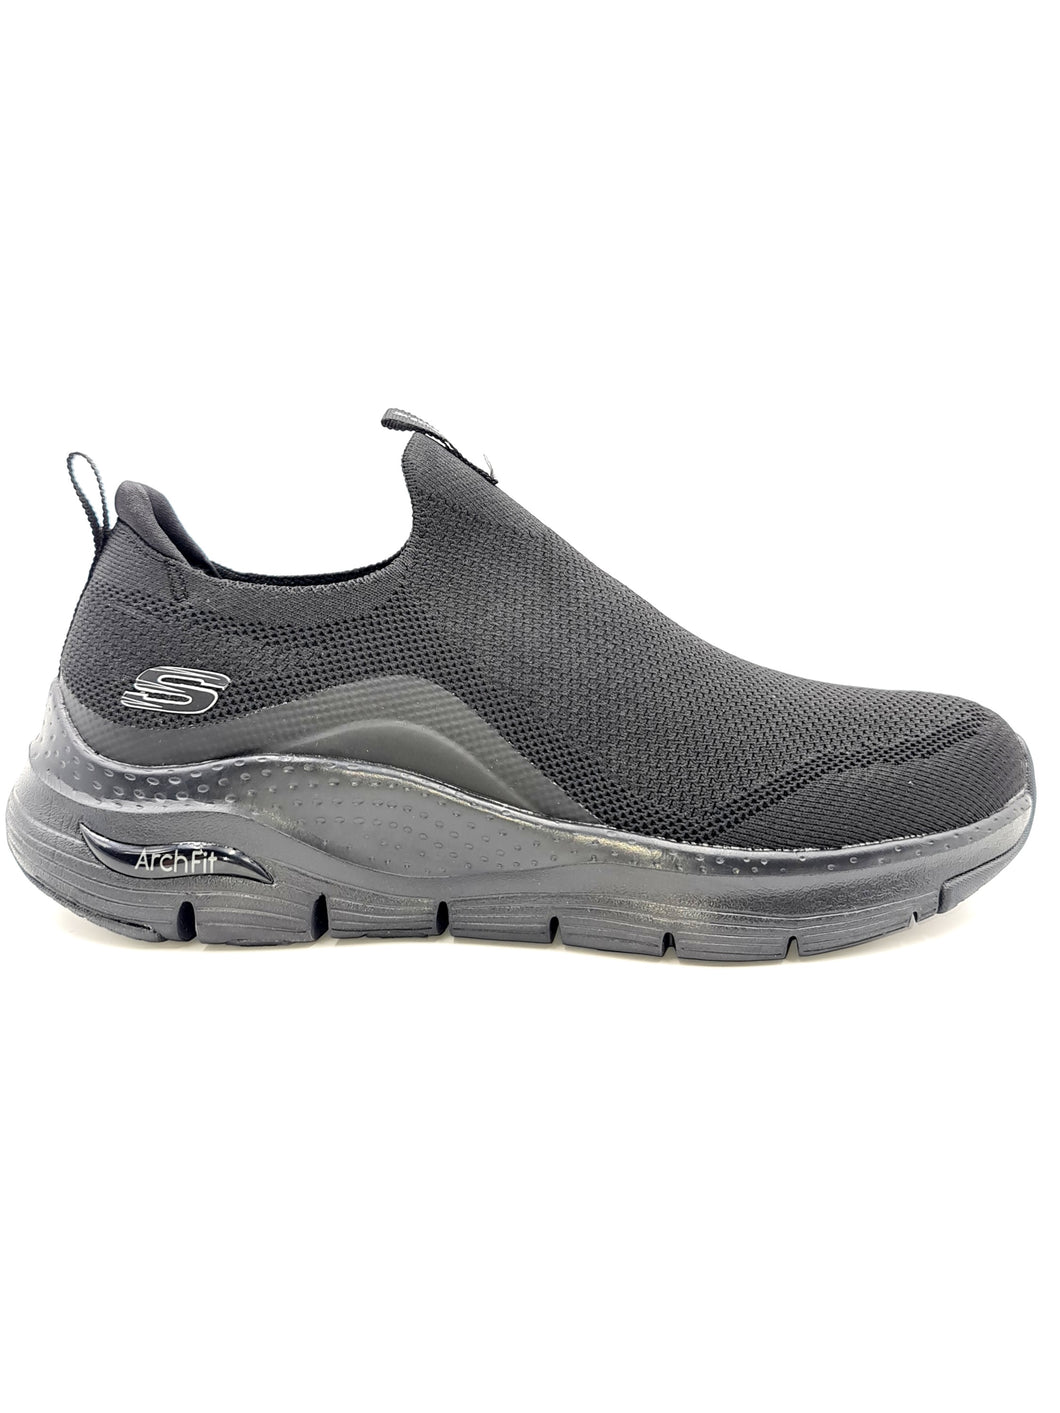 SKECHERS Slip on Arch Fit - Ascension nero D93